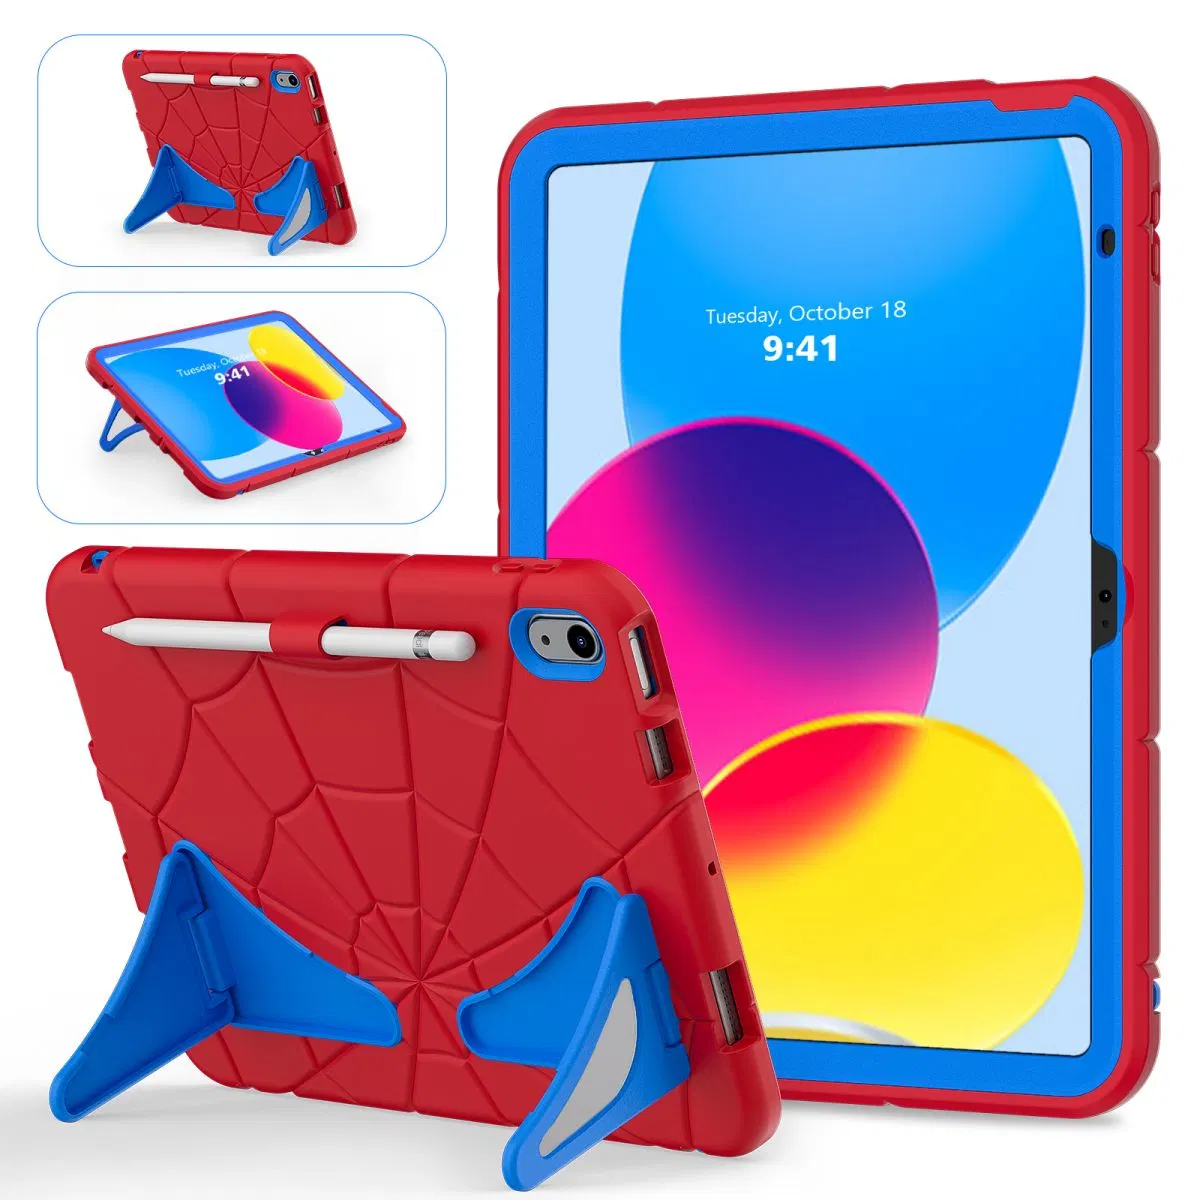 Spiderman Tablet Case Silicone PC Cover for iPad 10